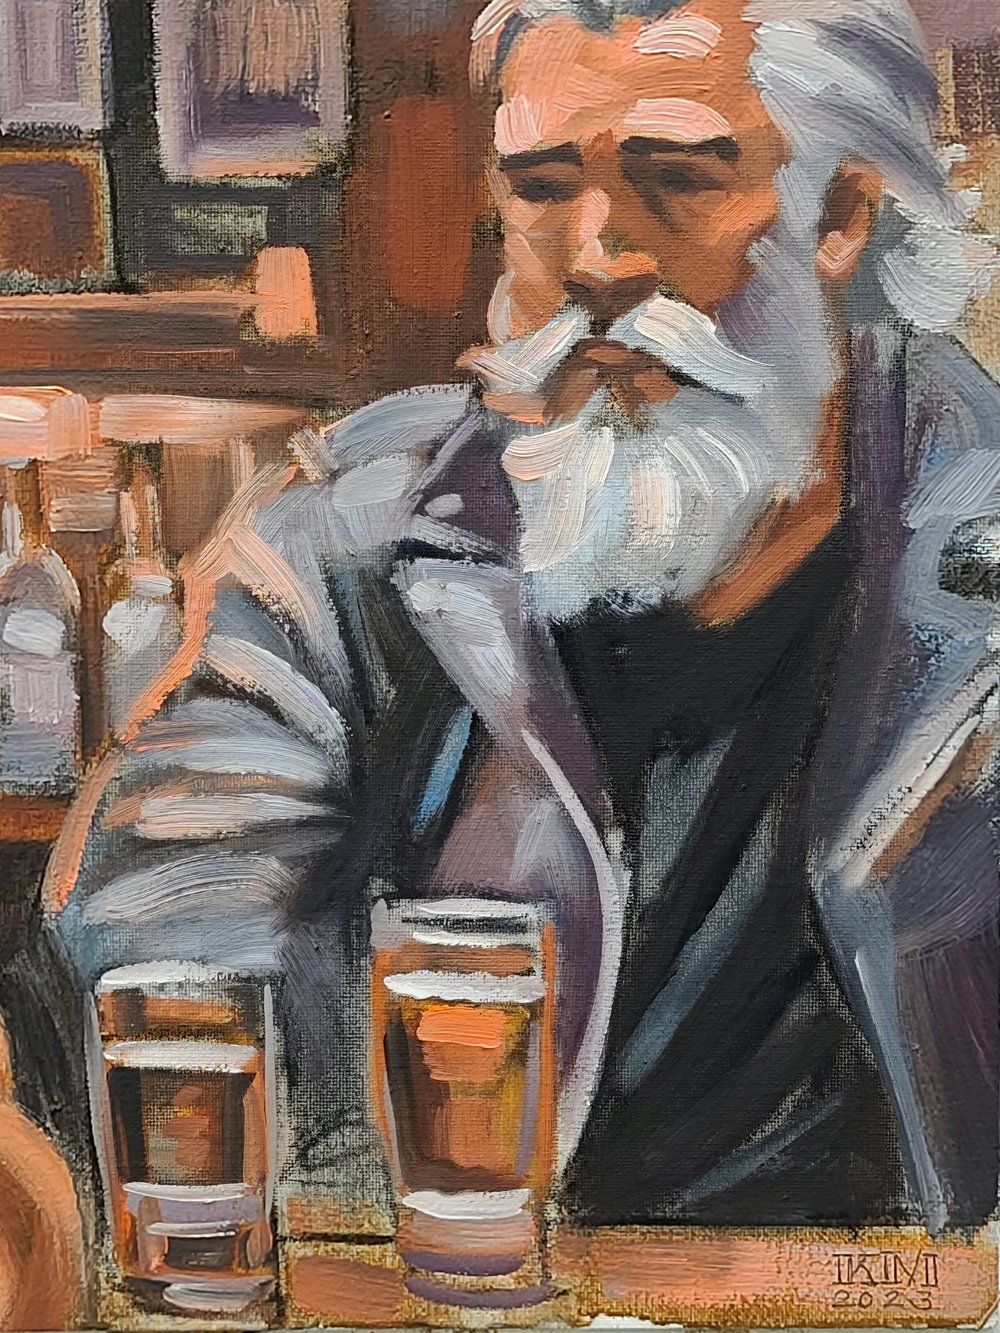 At the Bar, 16x20 inches oil on canvas panel by Kenney Mencher — Kenney  Mencher Artist: Representing the Underrepresented